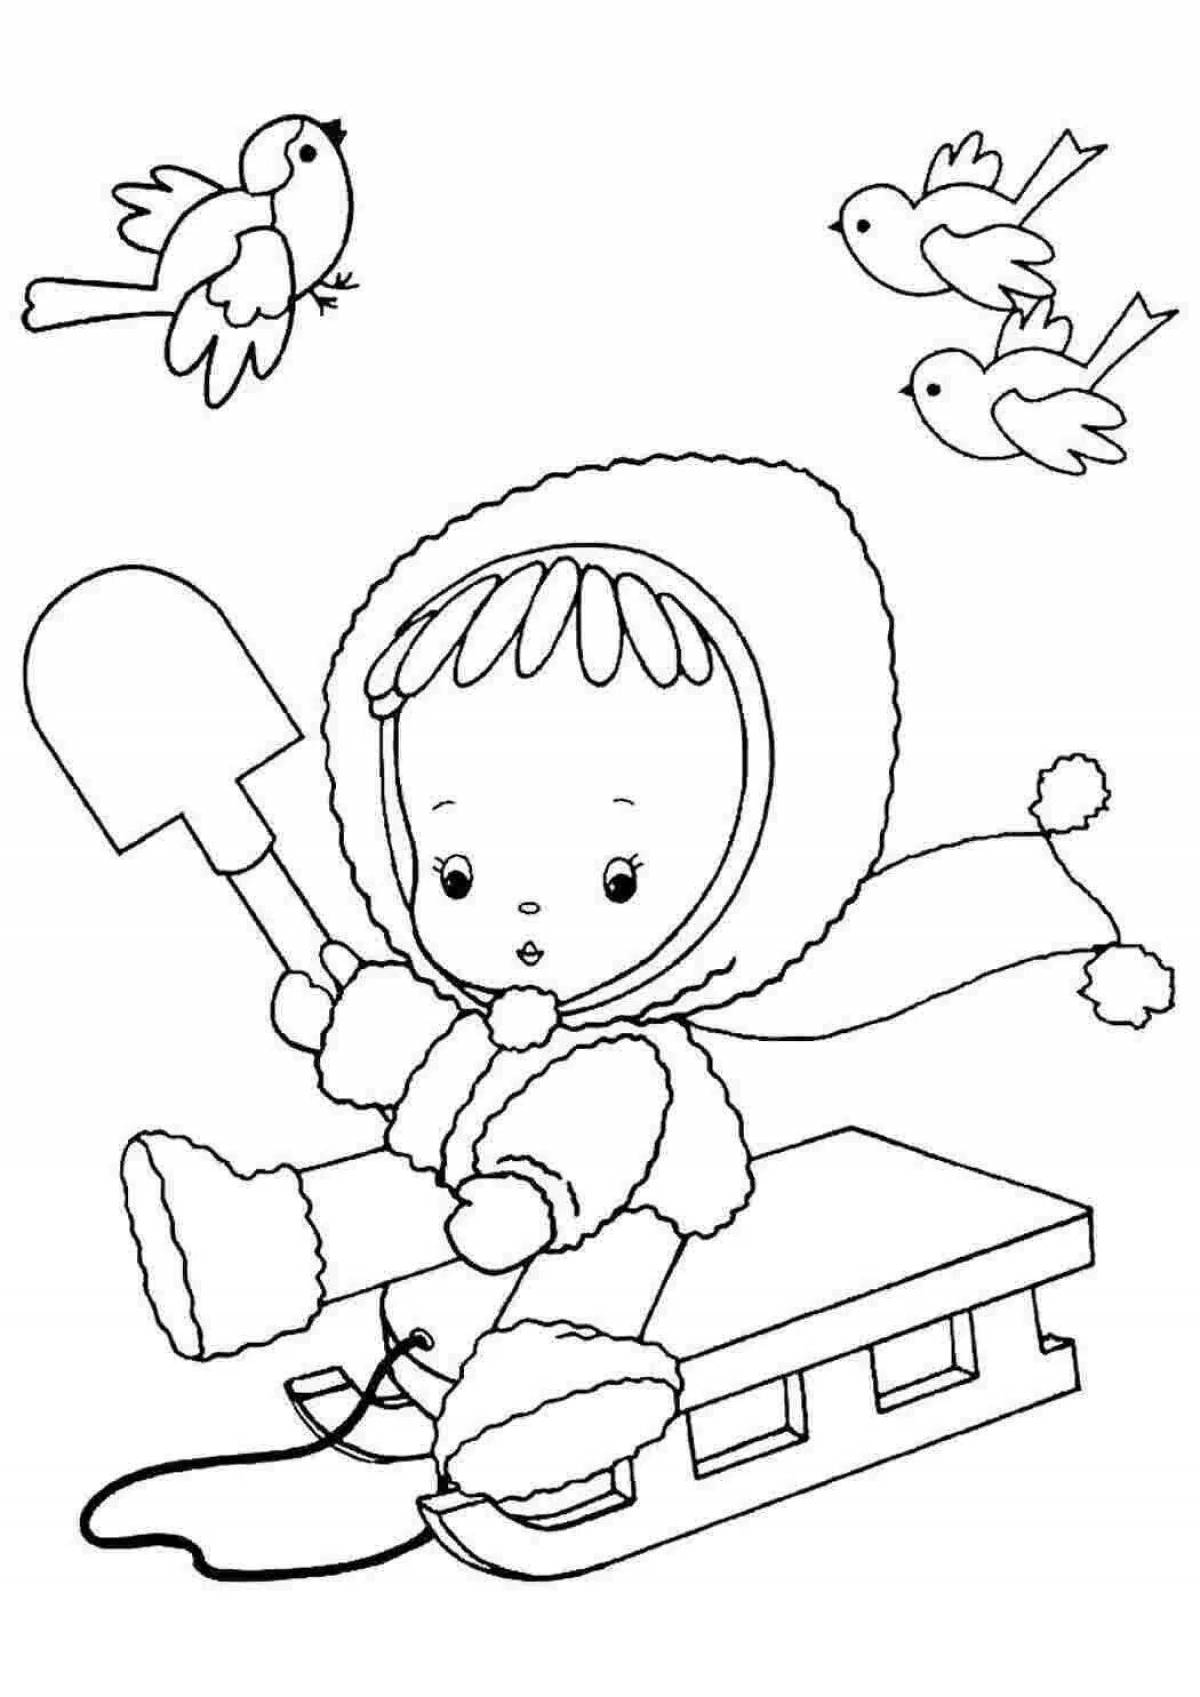 Colouring funny sleds